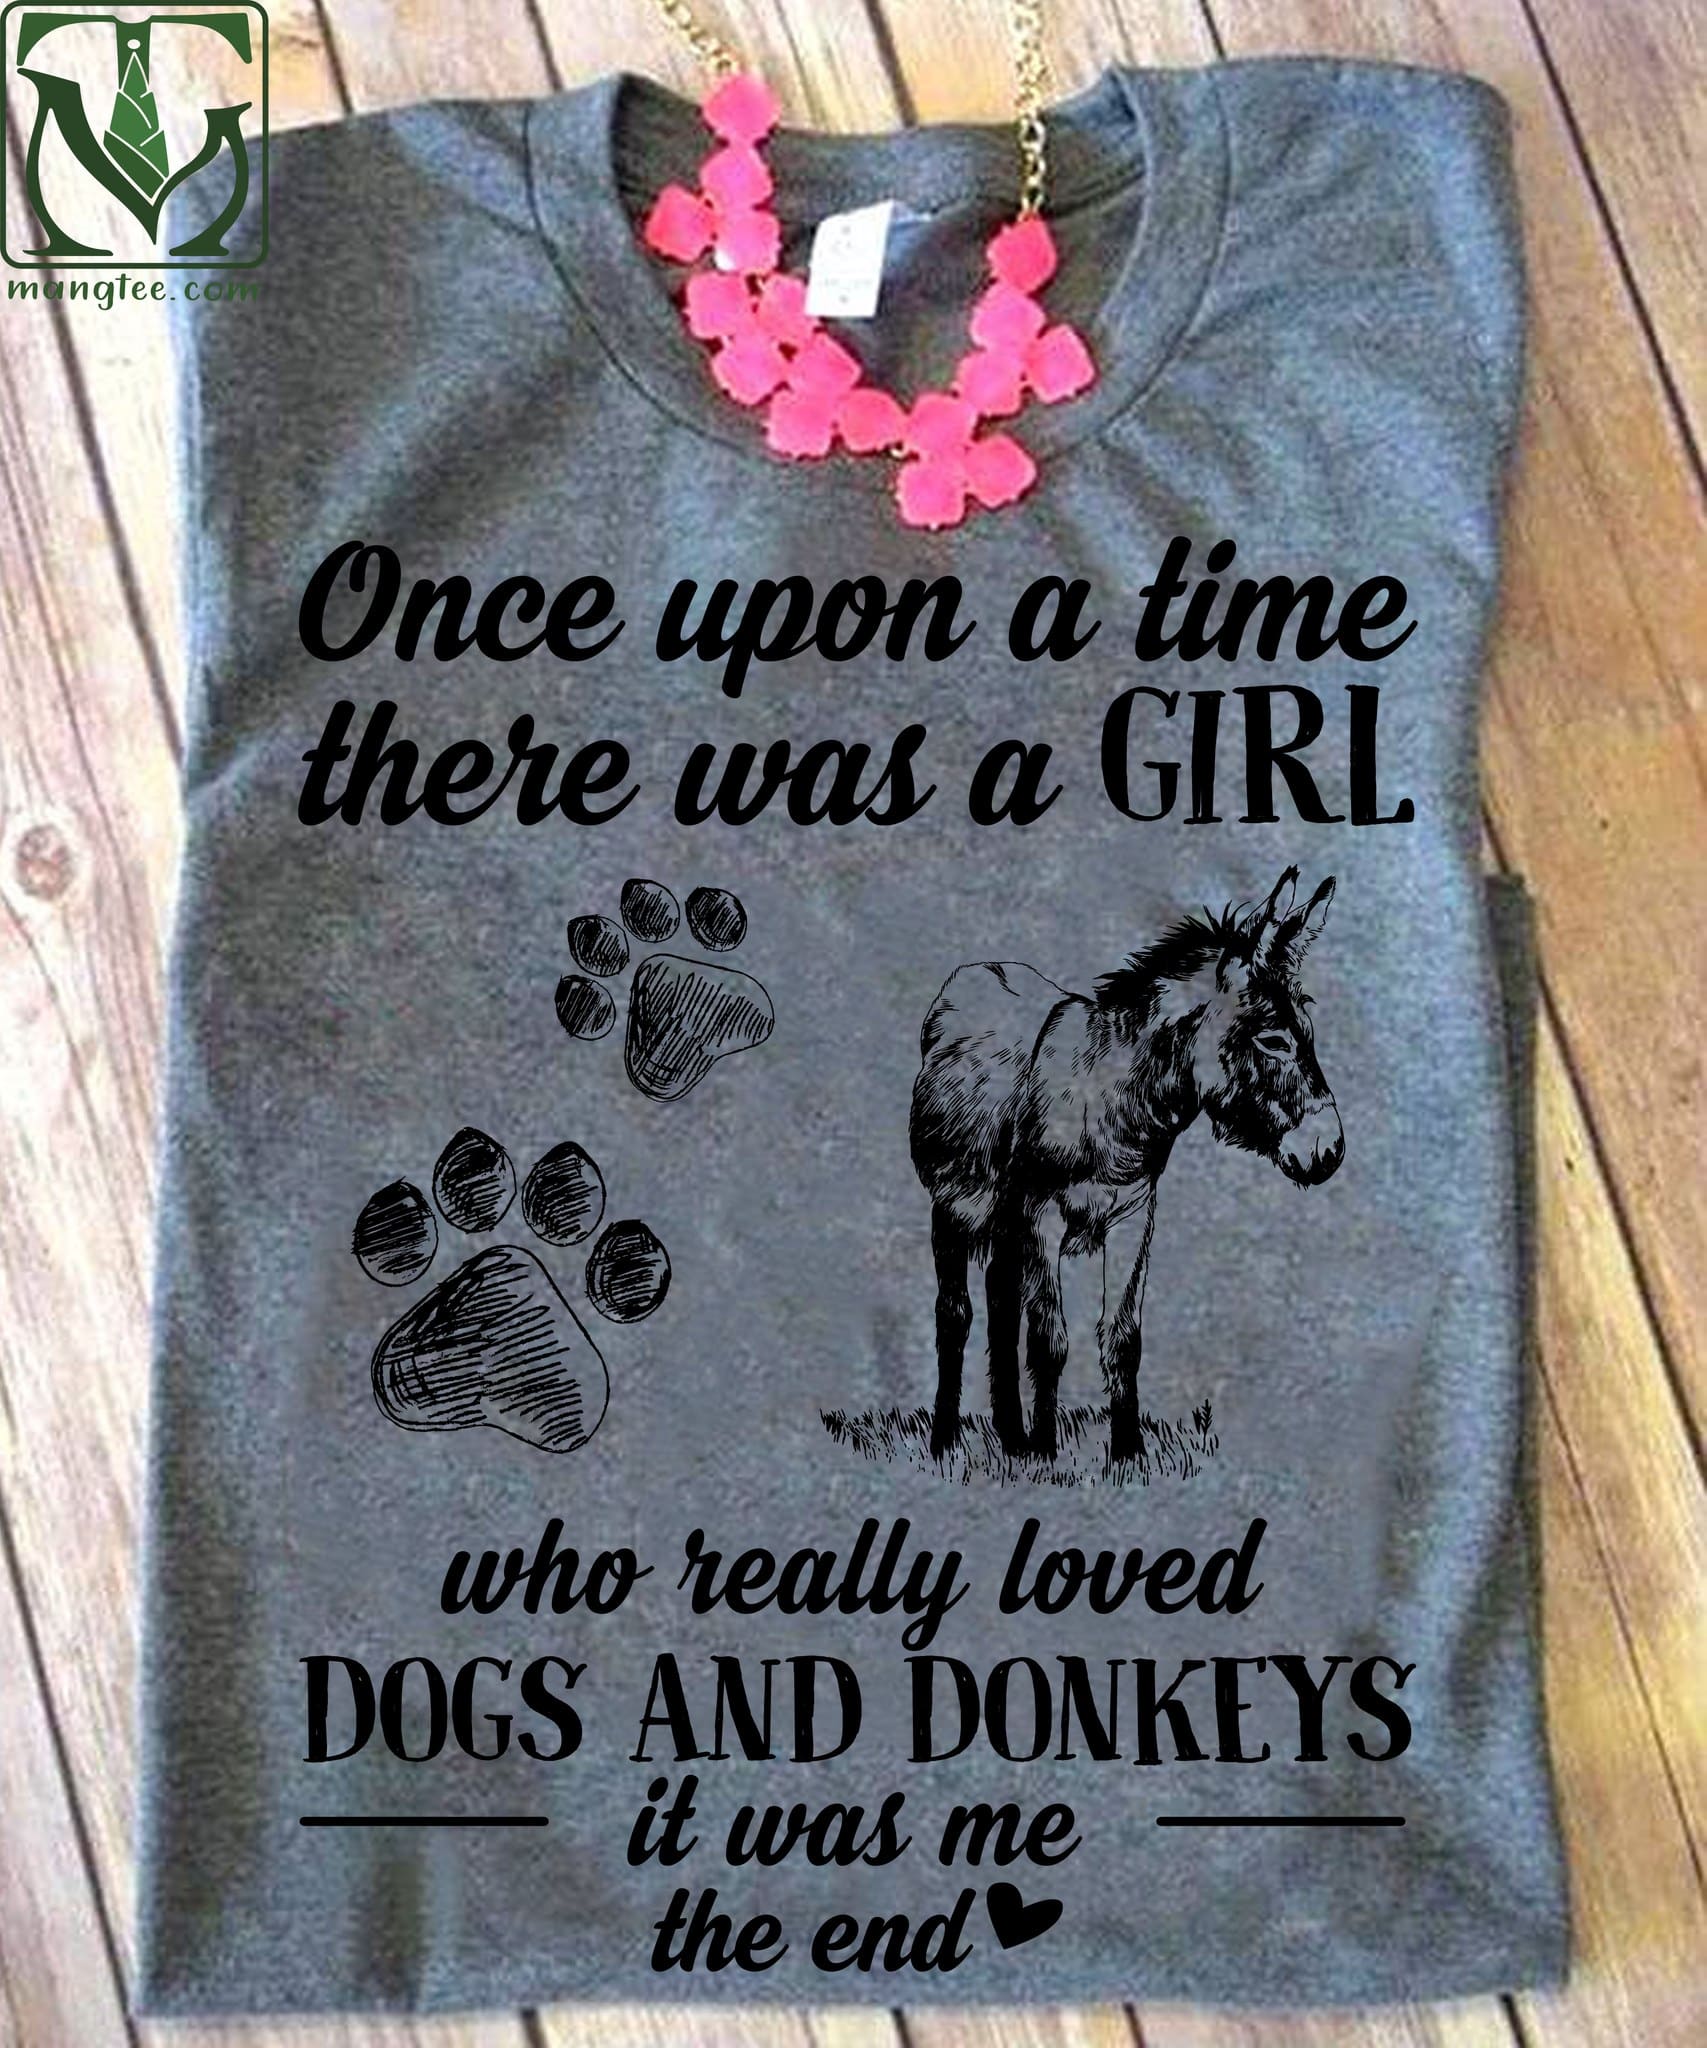 Once upon a time there was a girl who really loved dogs and donkeys - Animal lover T-shirt, donkey and dog footprint